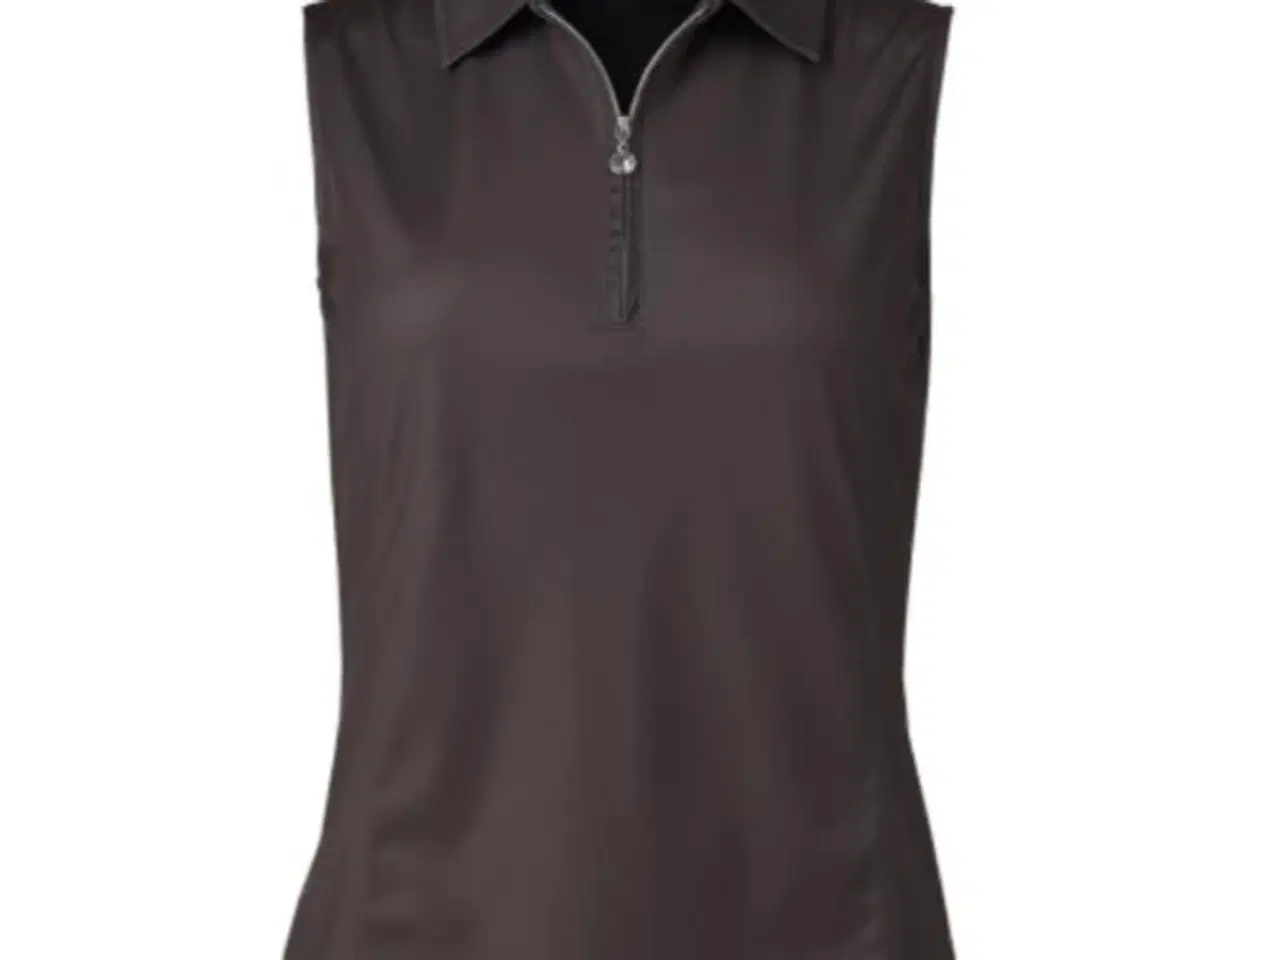 Billede 1 - Daily golfbluse